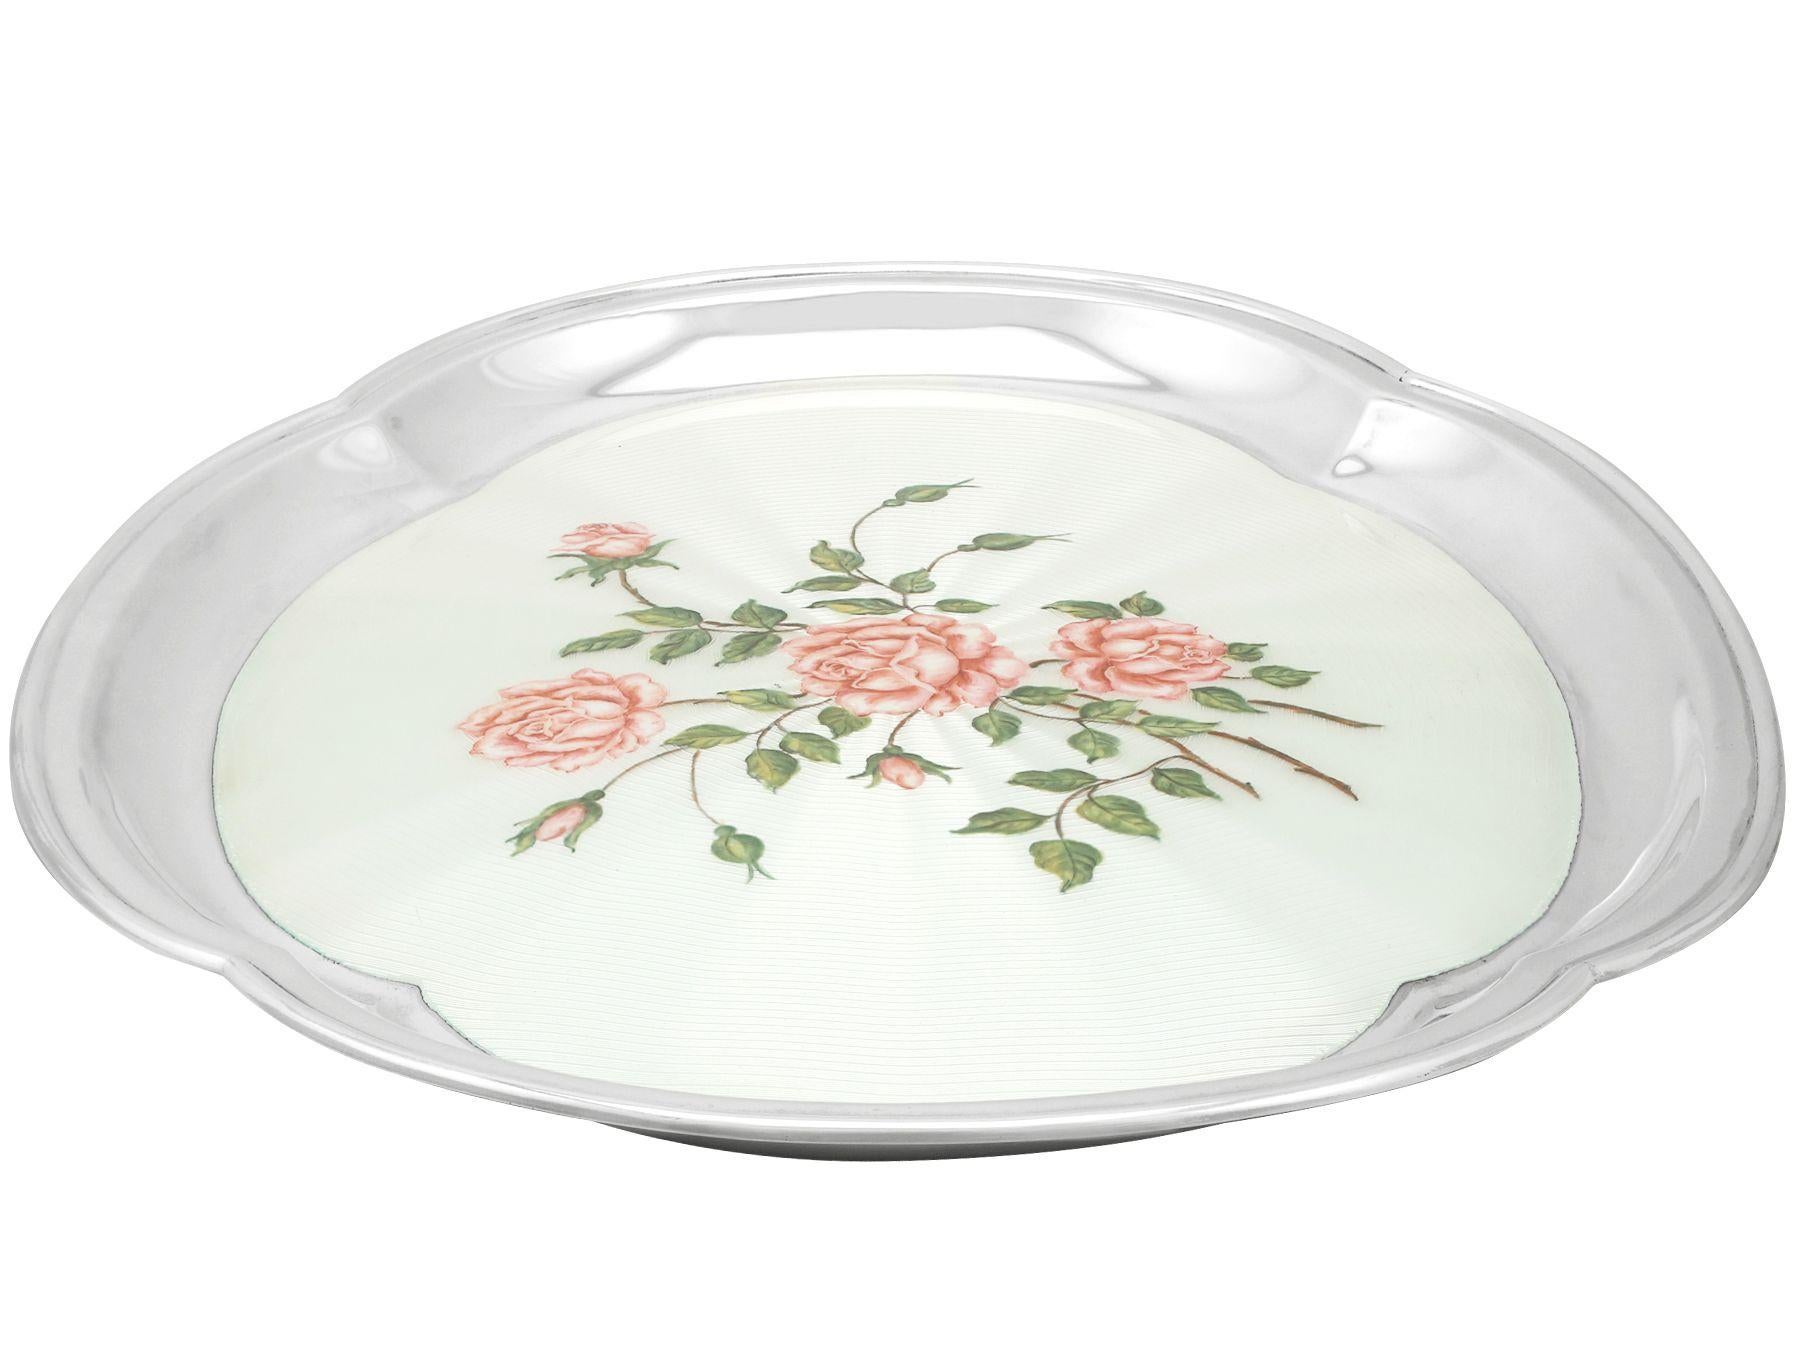 Vintage 1971 Sterling Silver and Enamel Rose Dressing Table Tray In Excellent Condition For Sale In Jesmond, Newcastle Upon Tyne